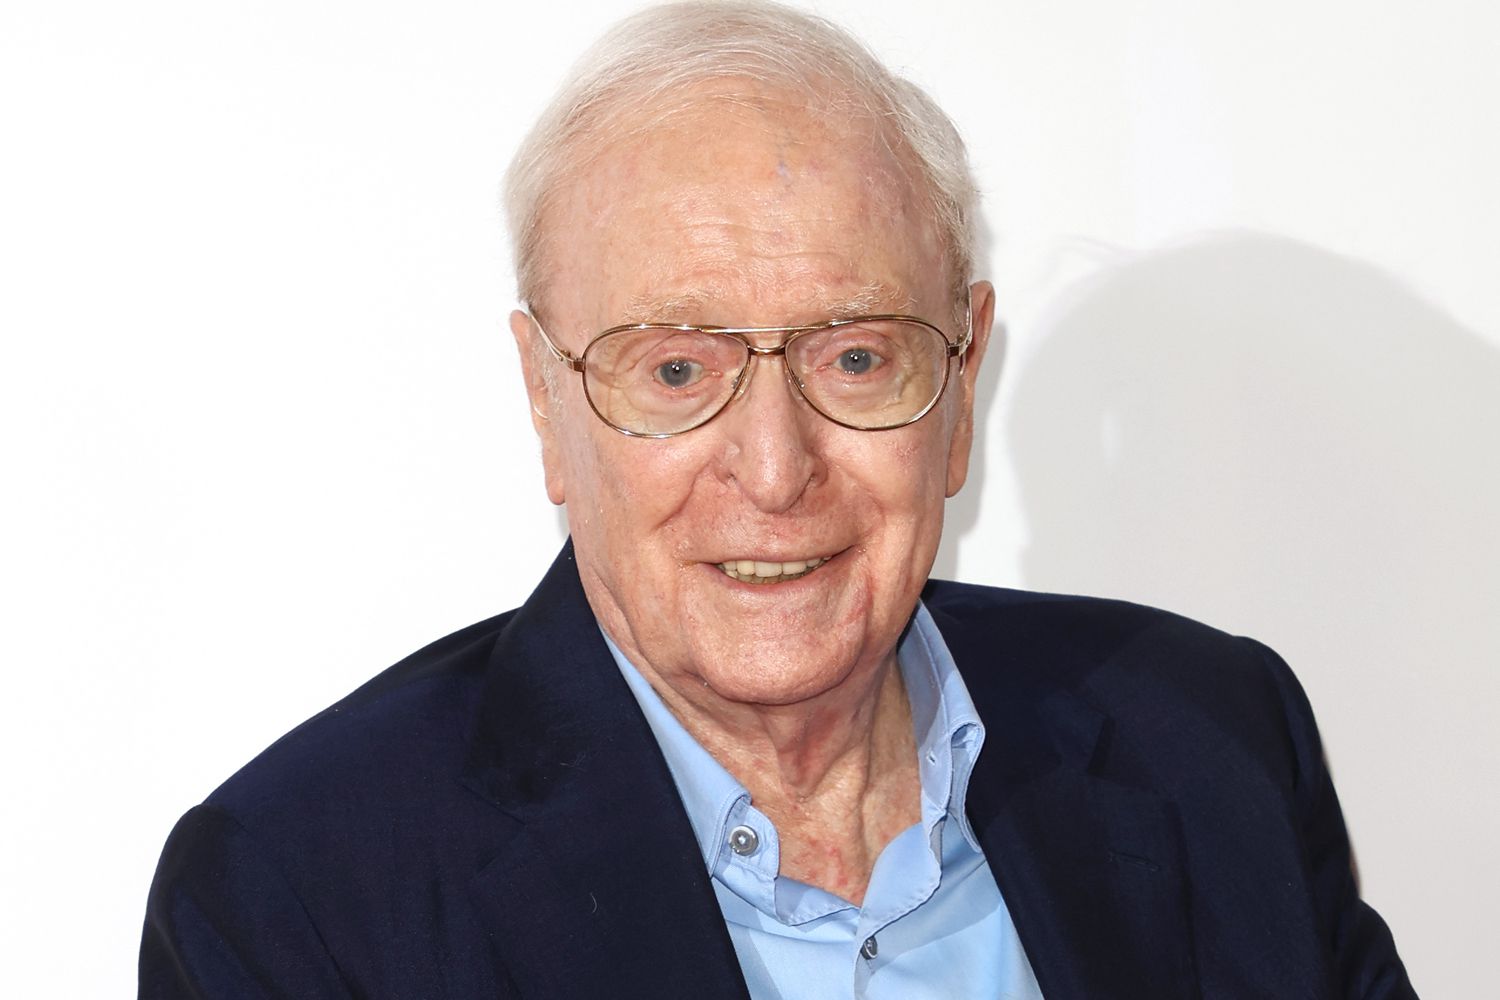 michael-caine-announces-retirement-from-acting